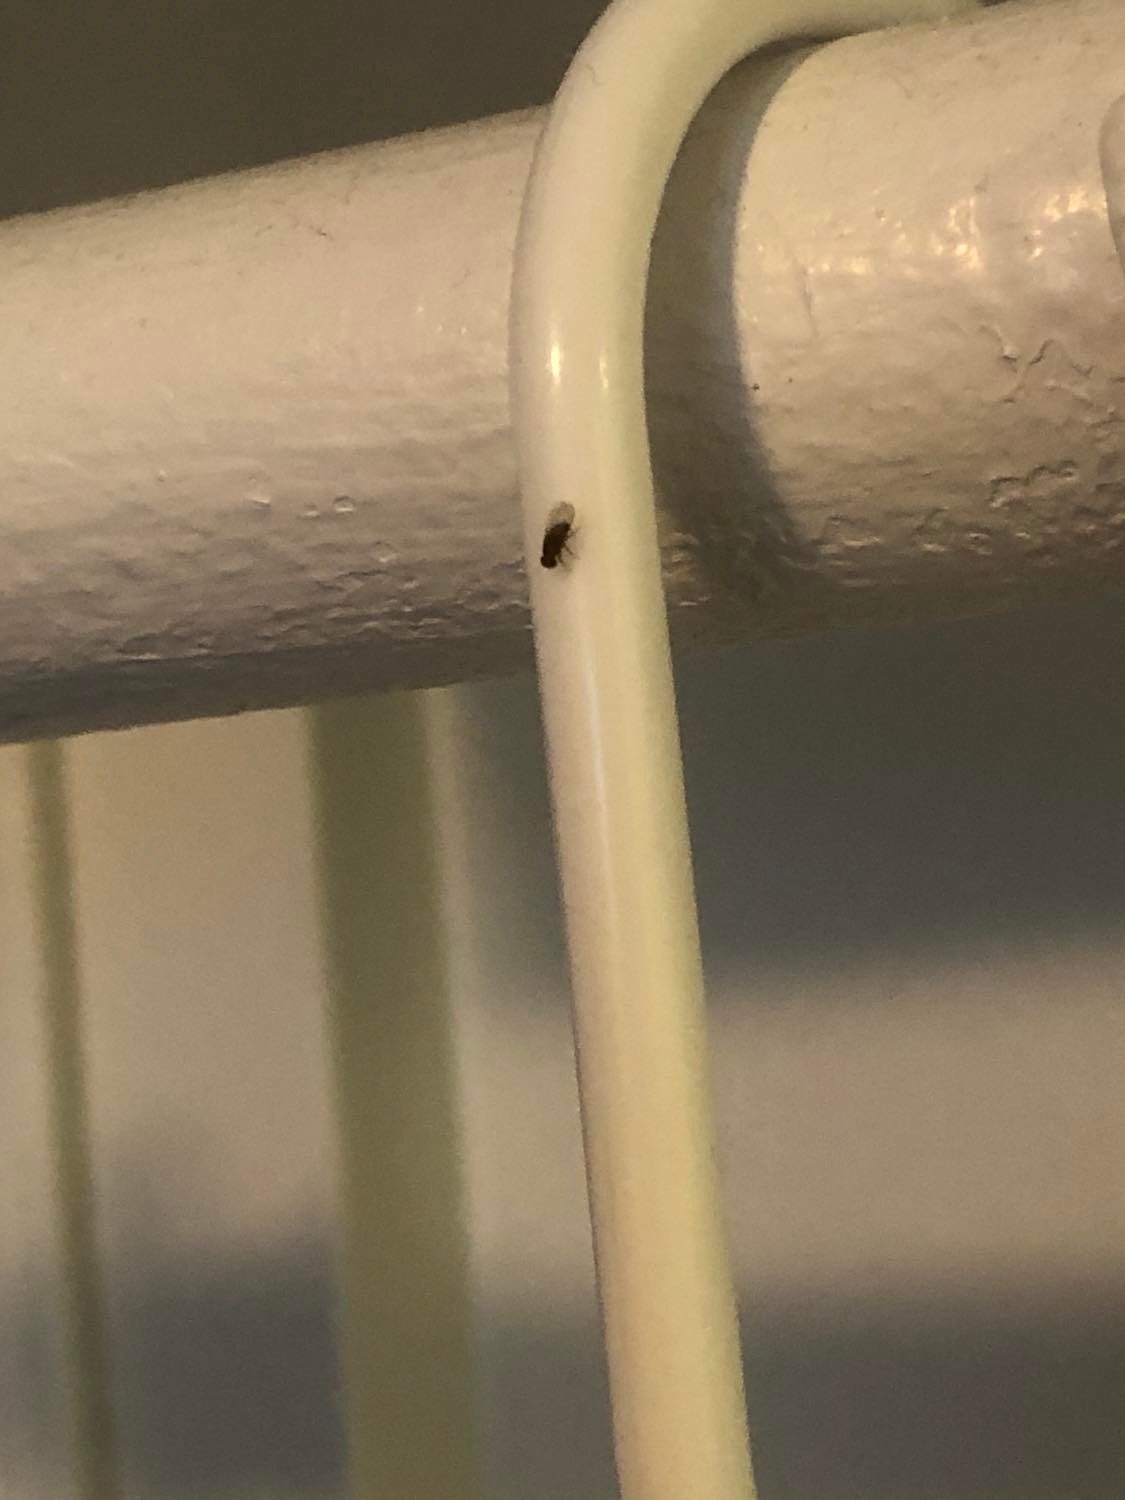 Tiny lil fly sitting on a plastic coathanger, just kinda looking downwards.